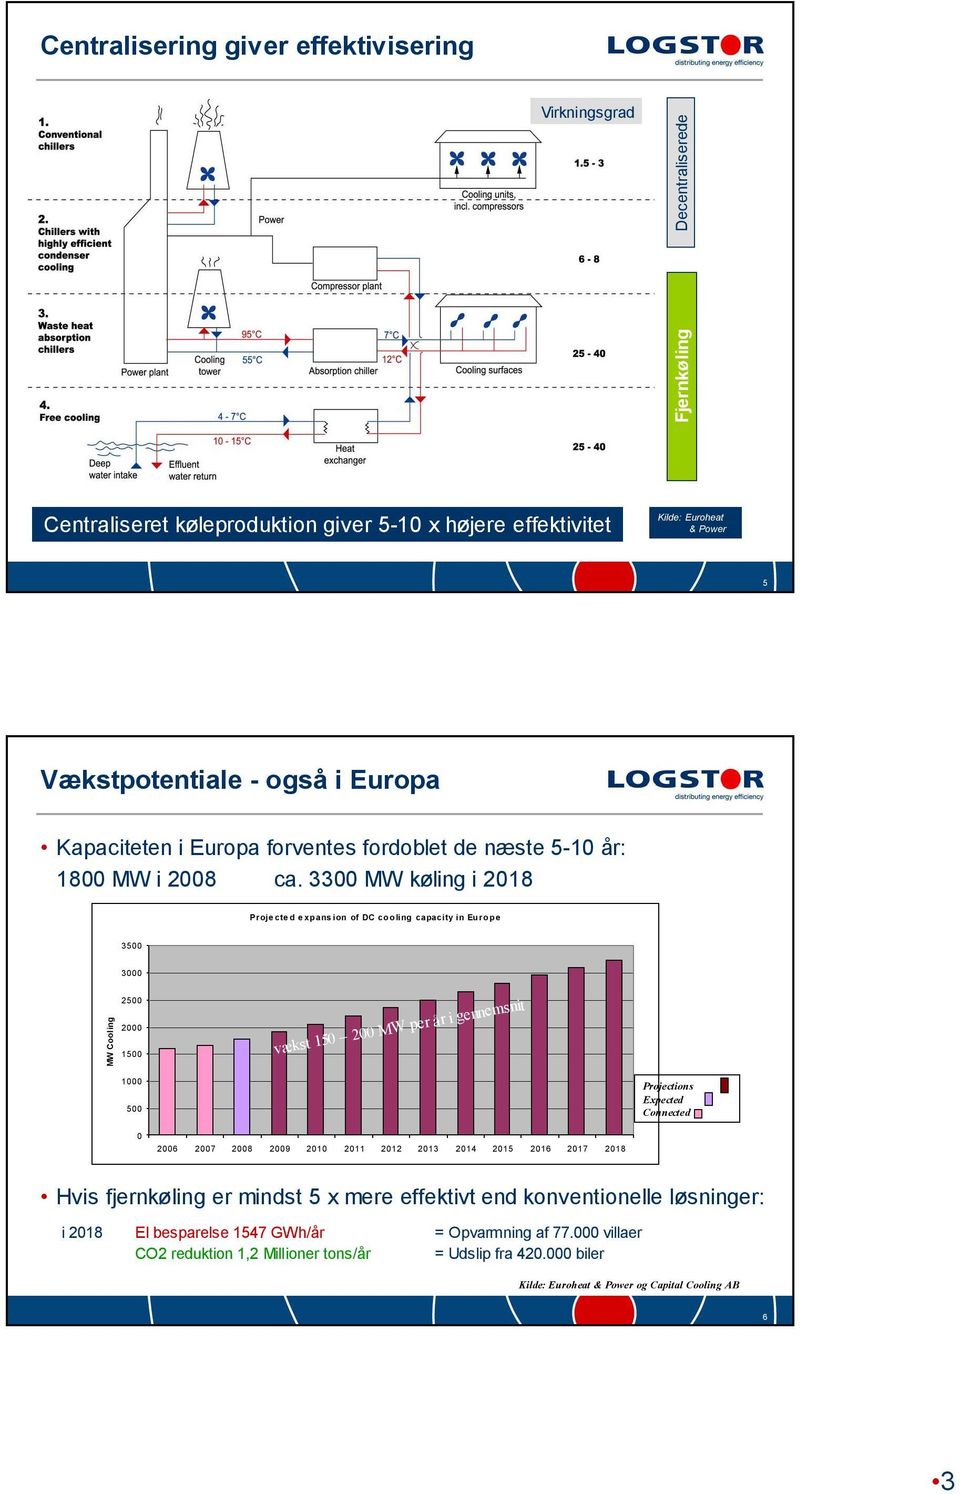 3300 MW køling i 2018 Projected expansion of DC cooling capacity in Europe 3500 3000 MW Cooling 2500 2000 1500 vækst 150 200 MW per år i gennemsnit 1000 500 Projections Expected Connected 0 2006 2007